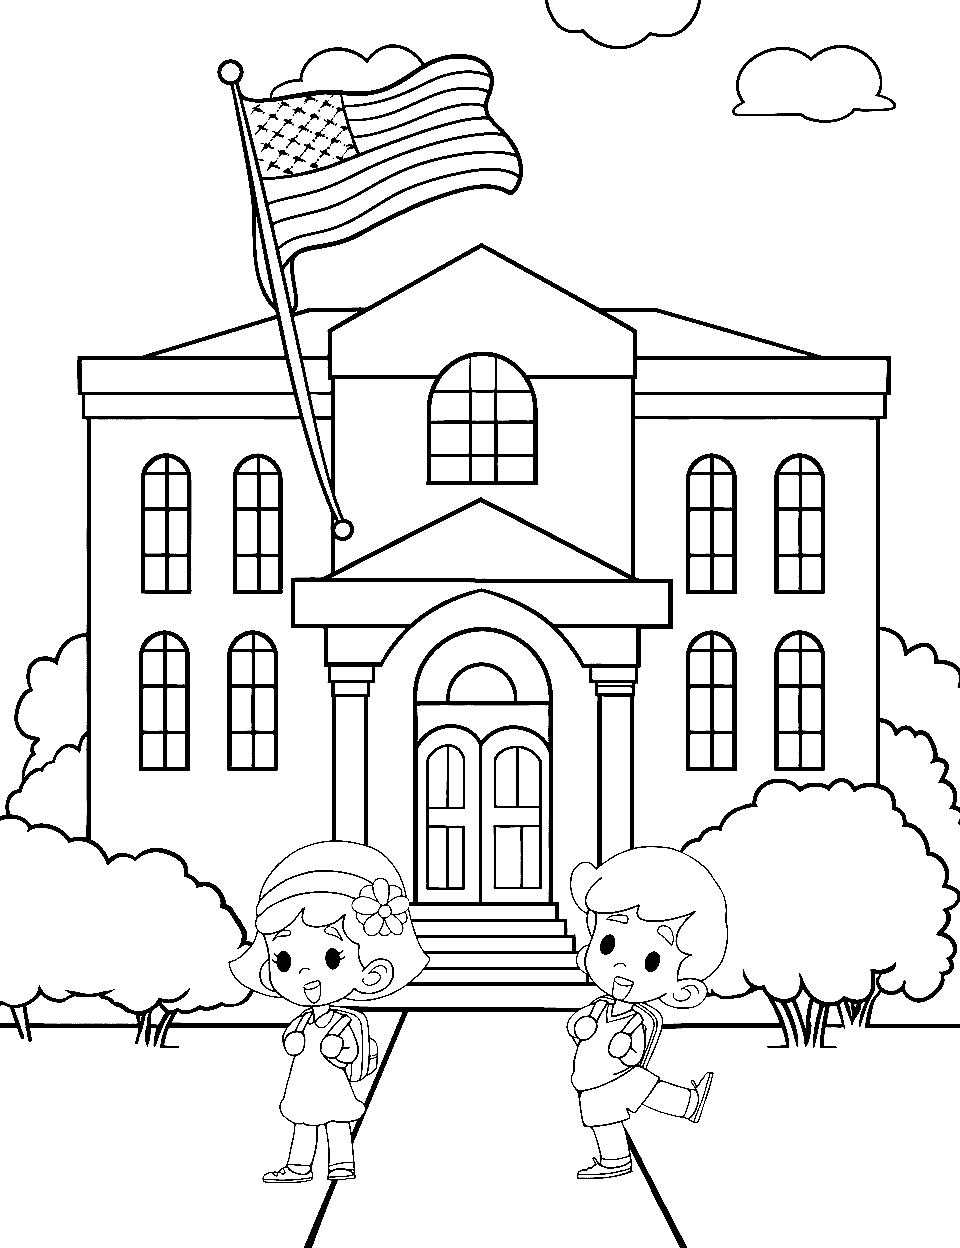 School Spirit Coloring Page - A school building with a flag and children walking around.